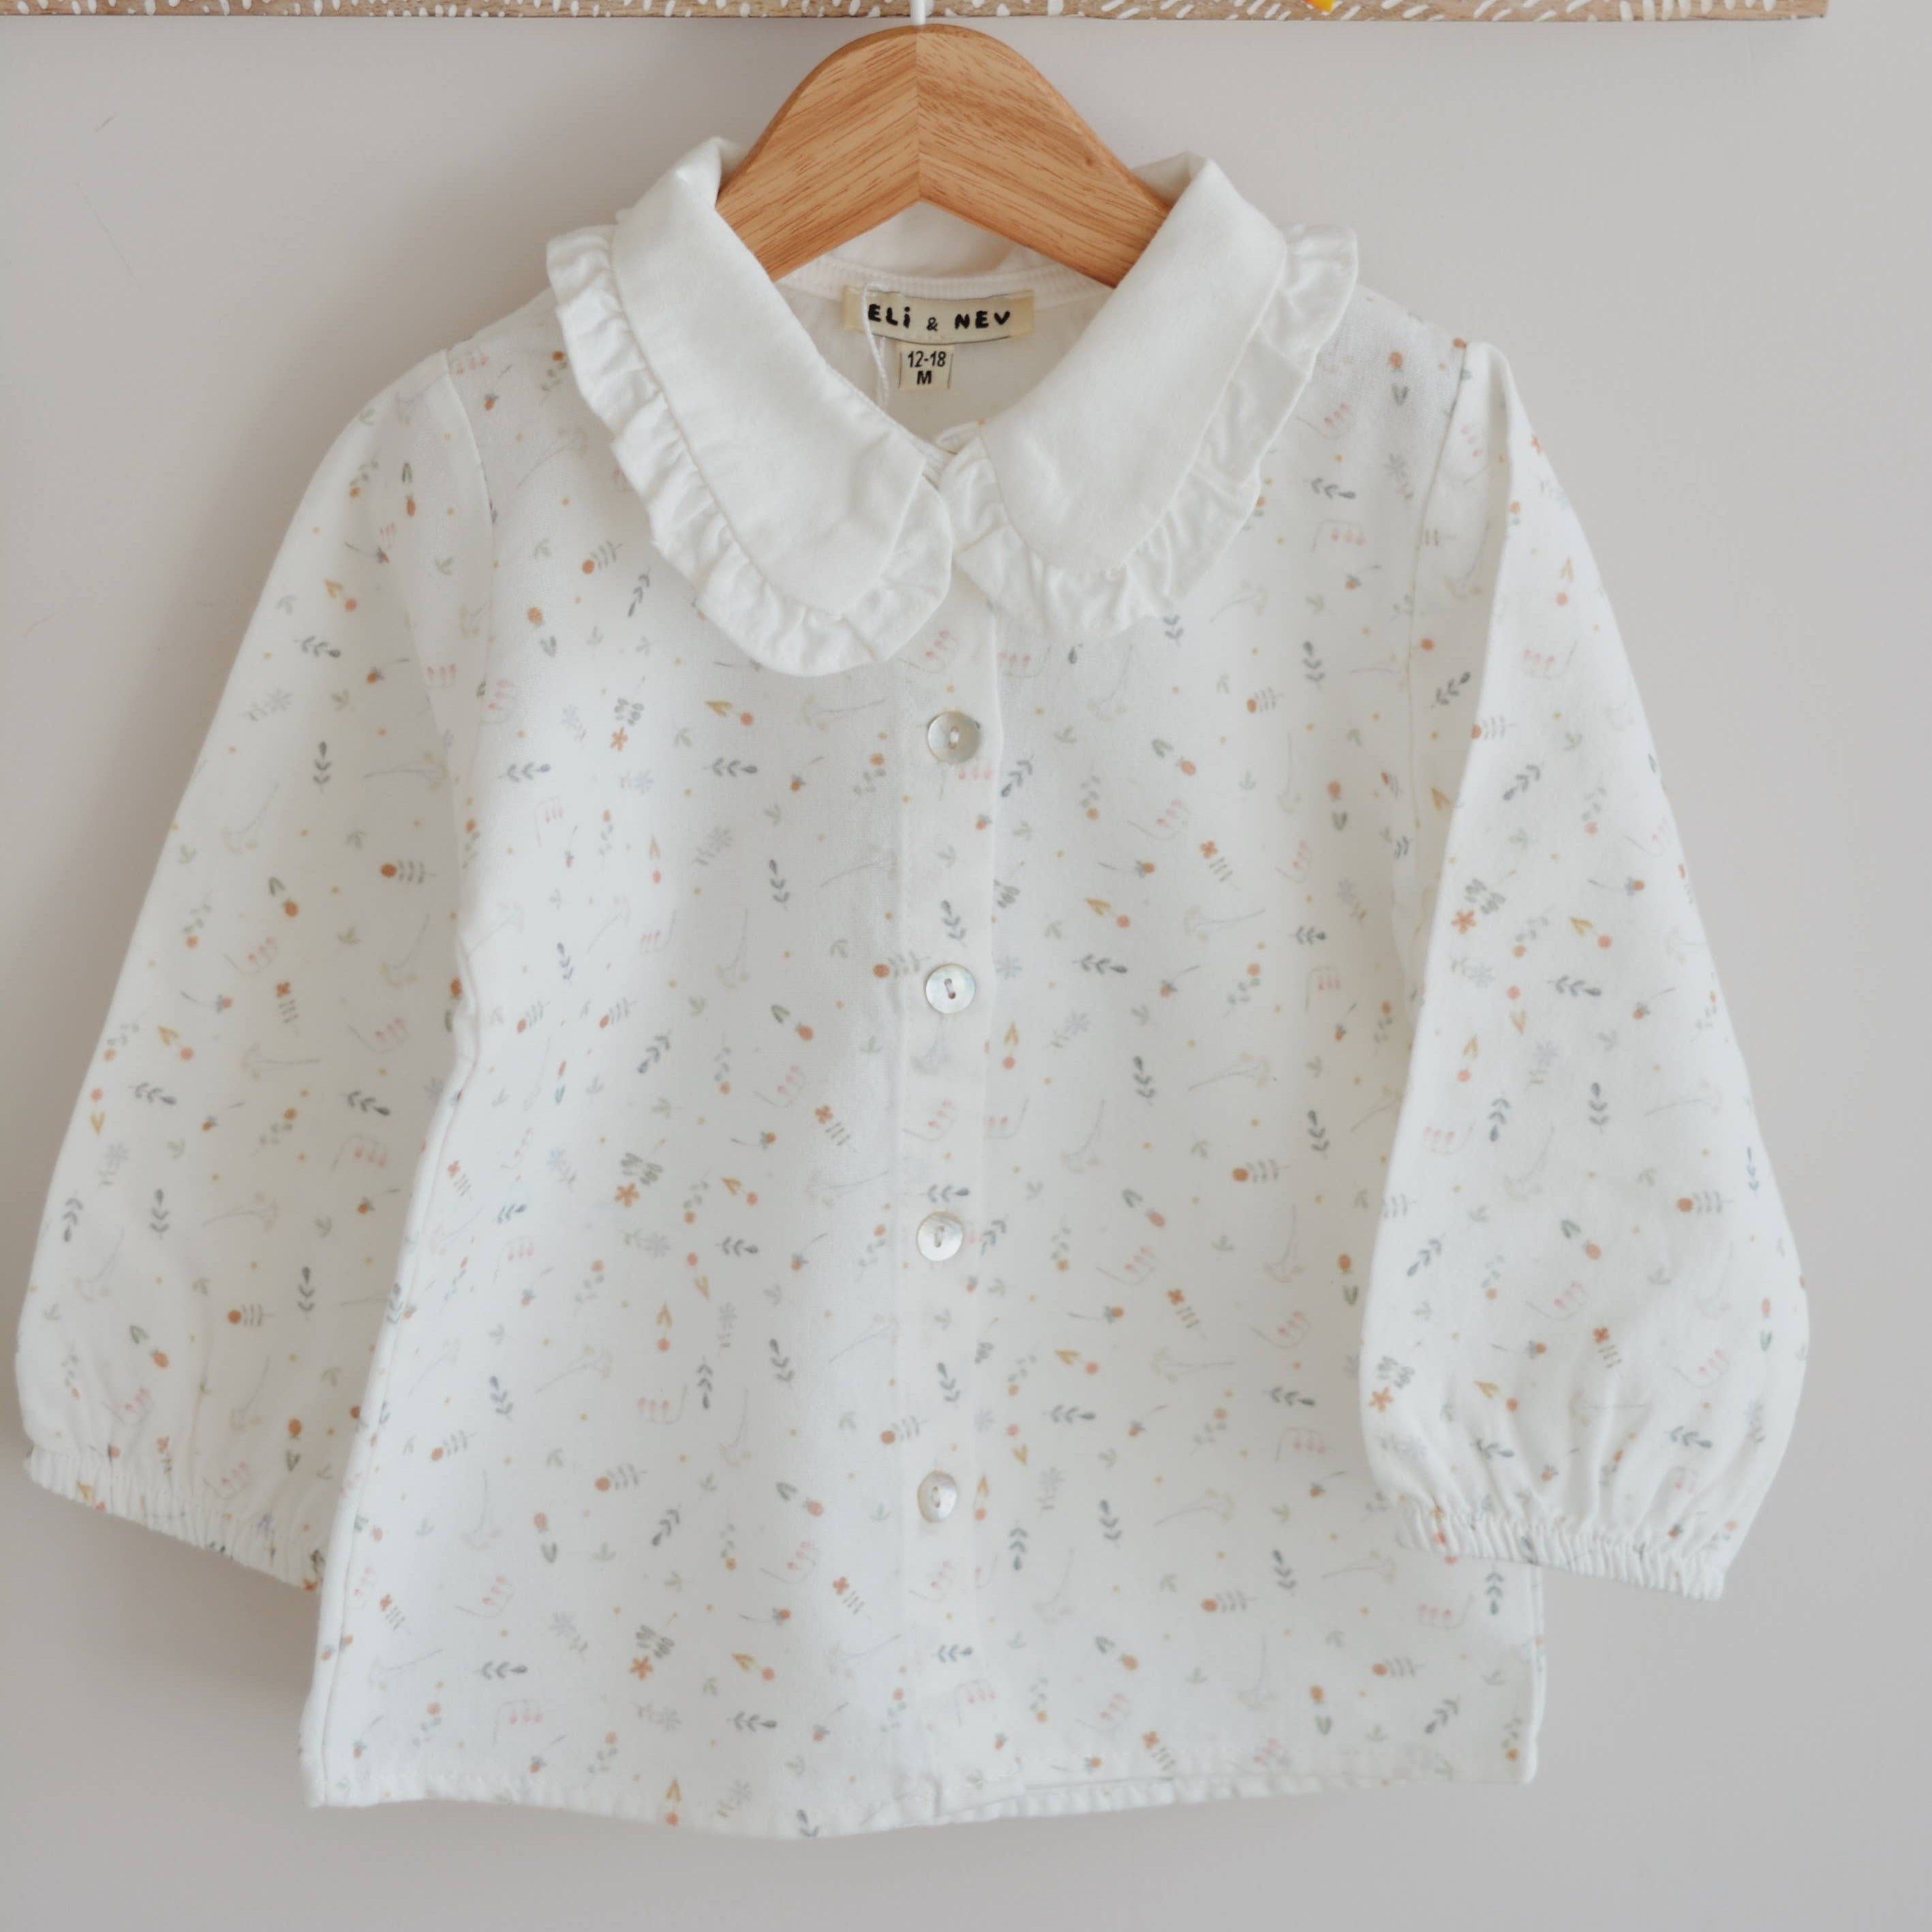 Eli & Nev Cotton Shirt For Mini Girls and Girls 12M - 4Y